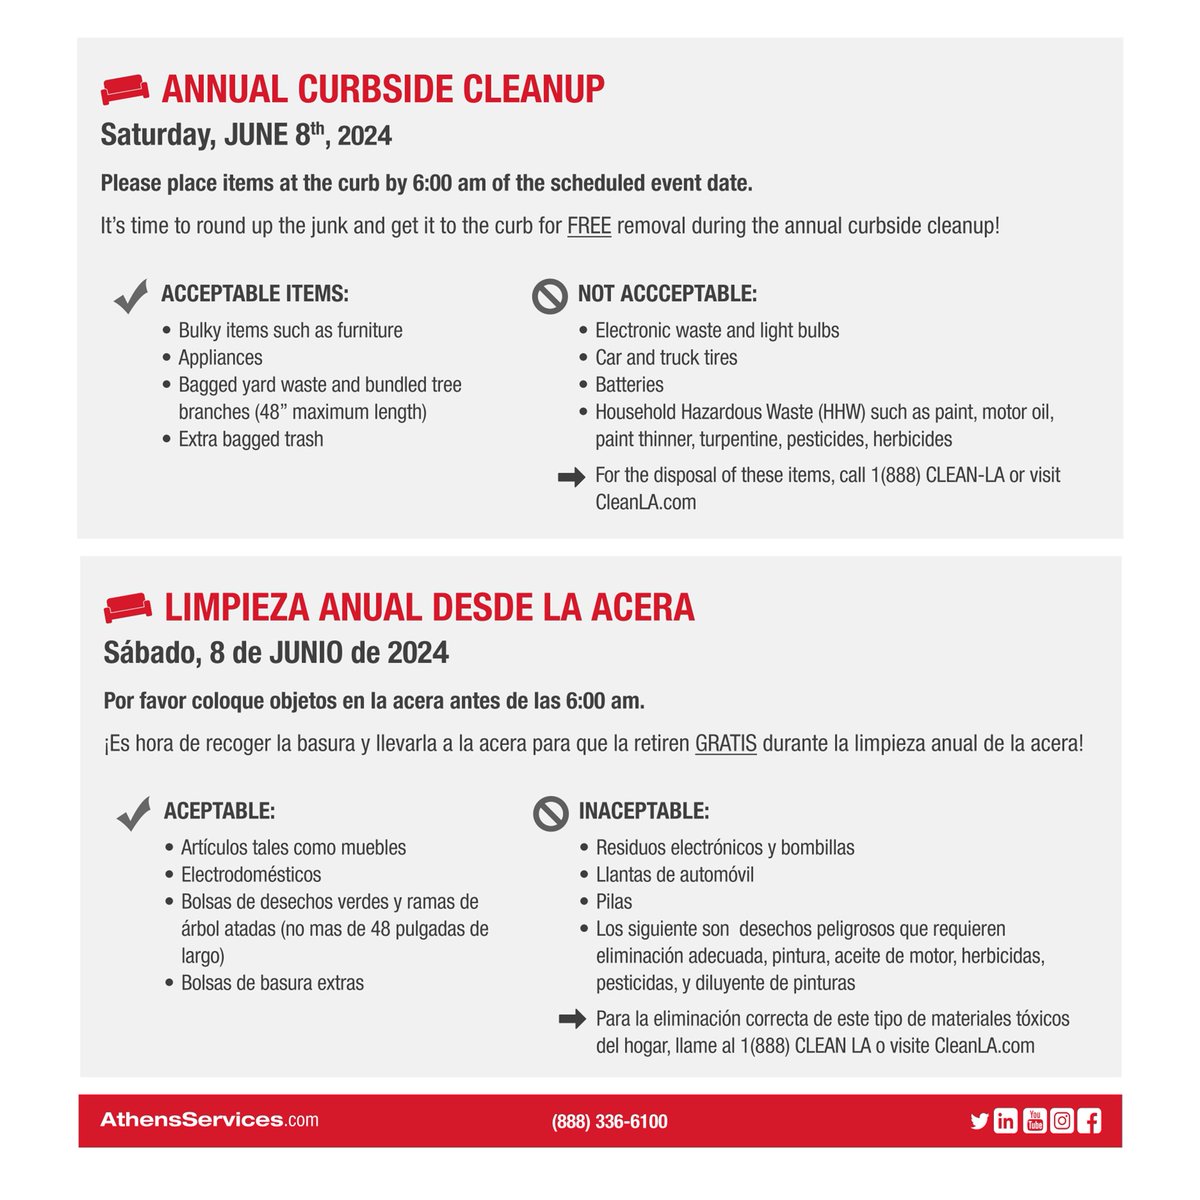 ANNUAL CURBSIDE CLEANUP
Saturday, June 8

Please place items at the curb by 6:00 am of the scheduled event date.

For the disposal of these items, call 1(888) CLEAN-LA or visit CleanLA.com

bellgardens.org/Home/Component…